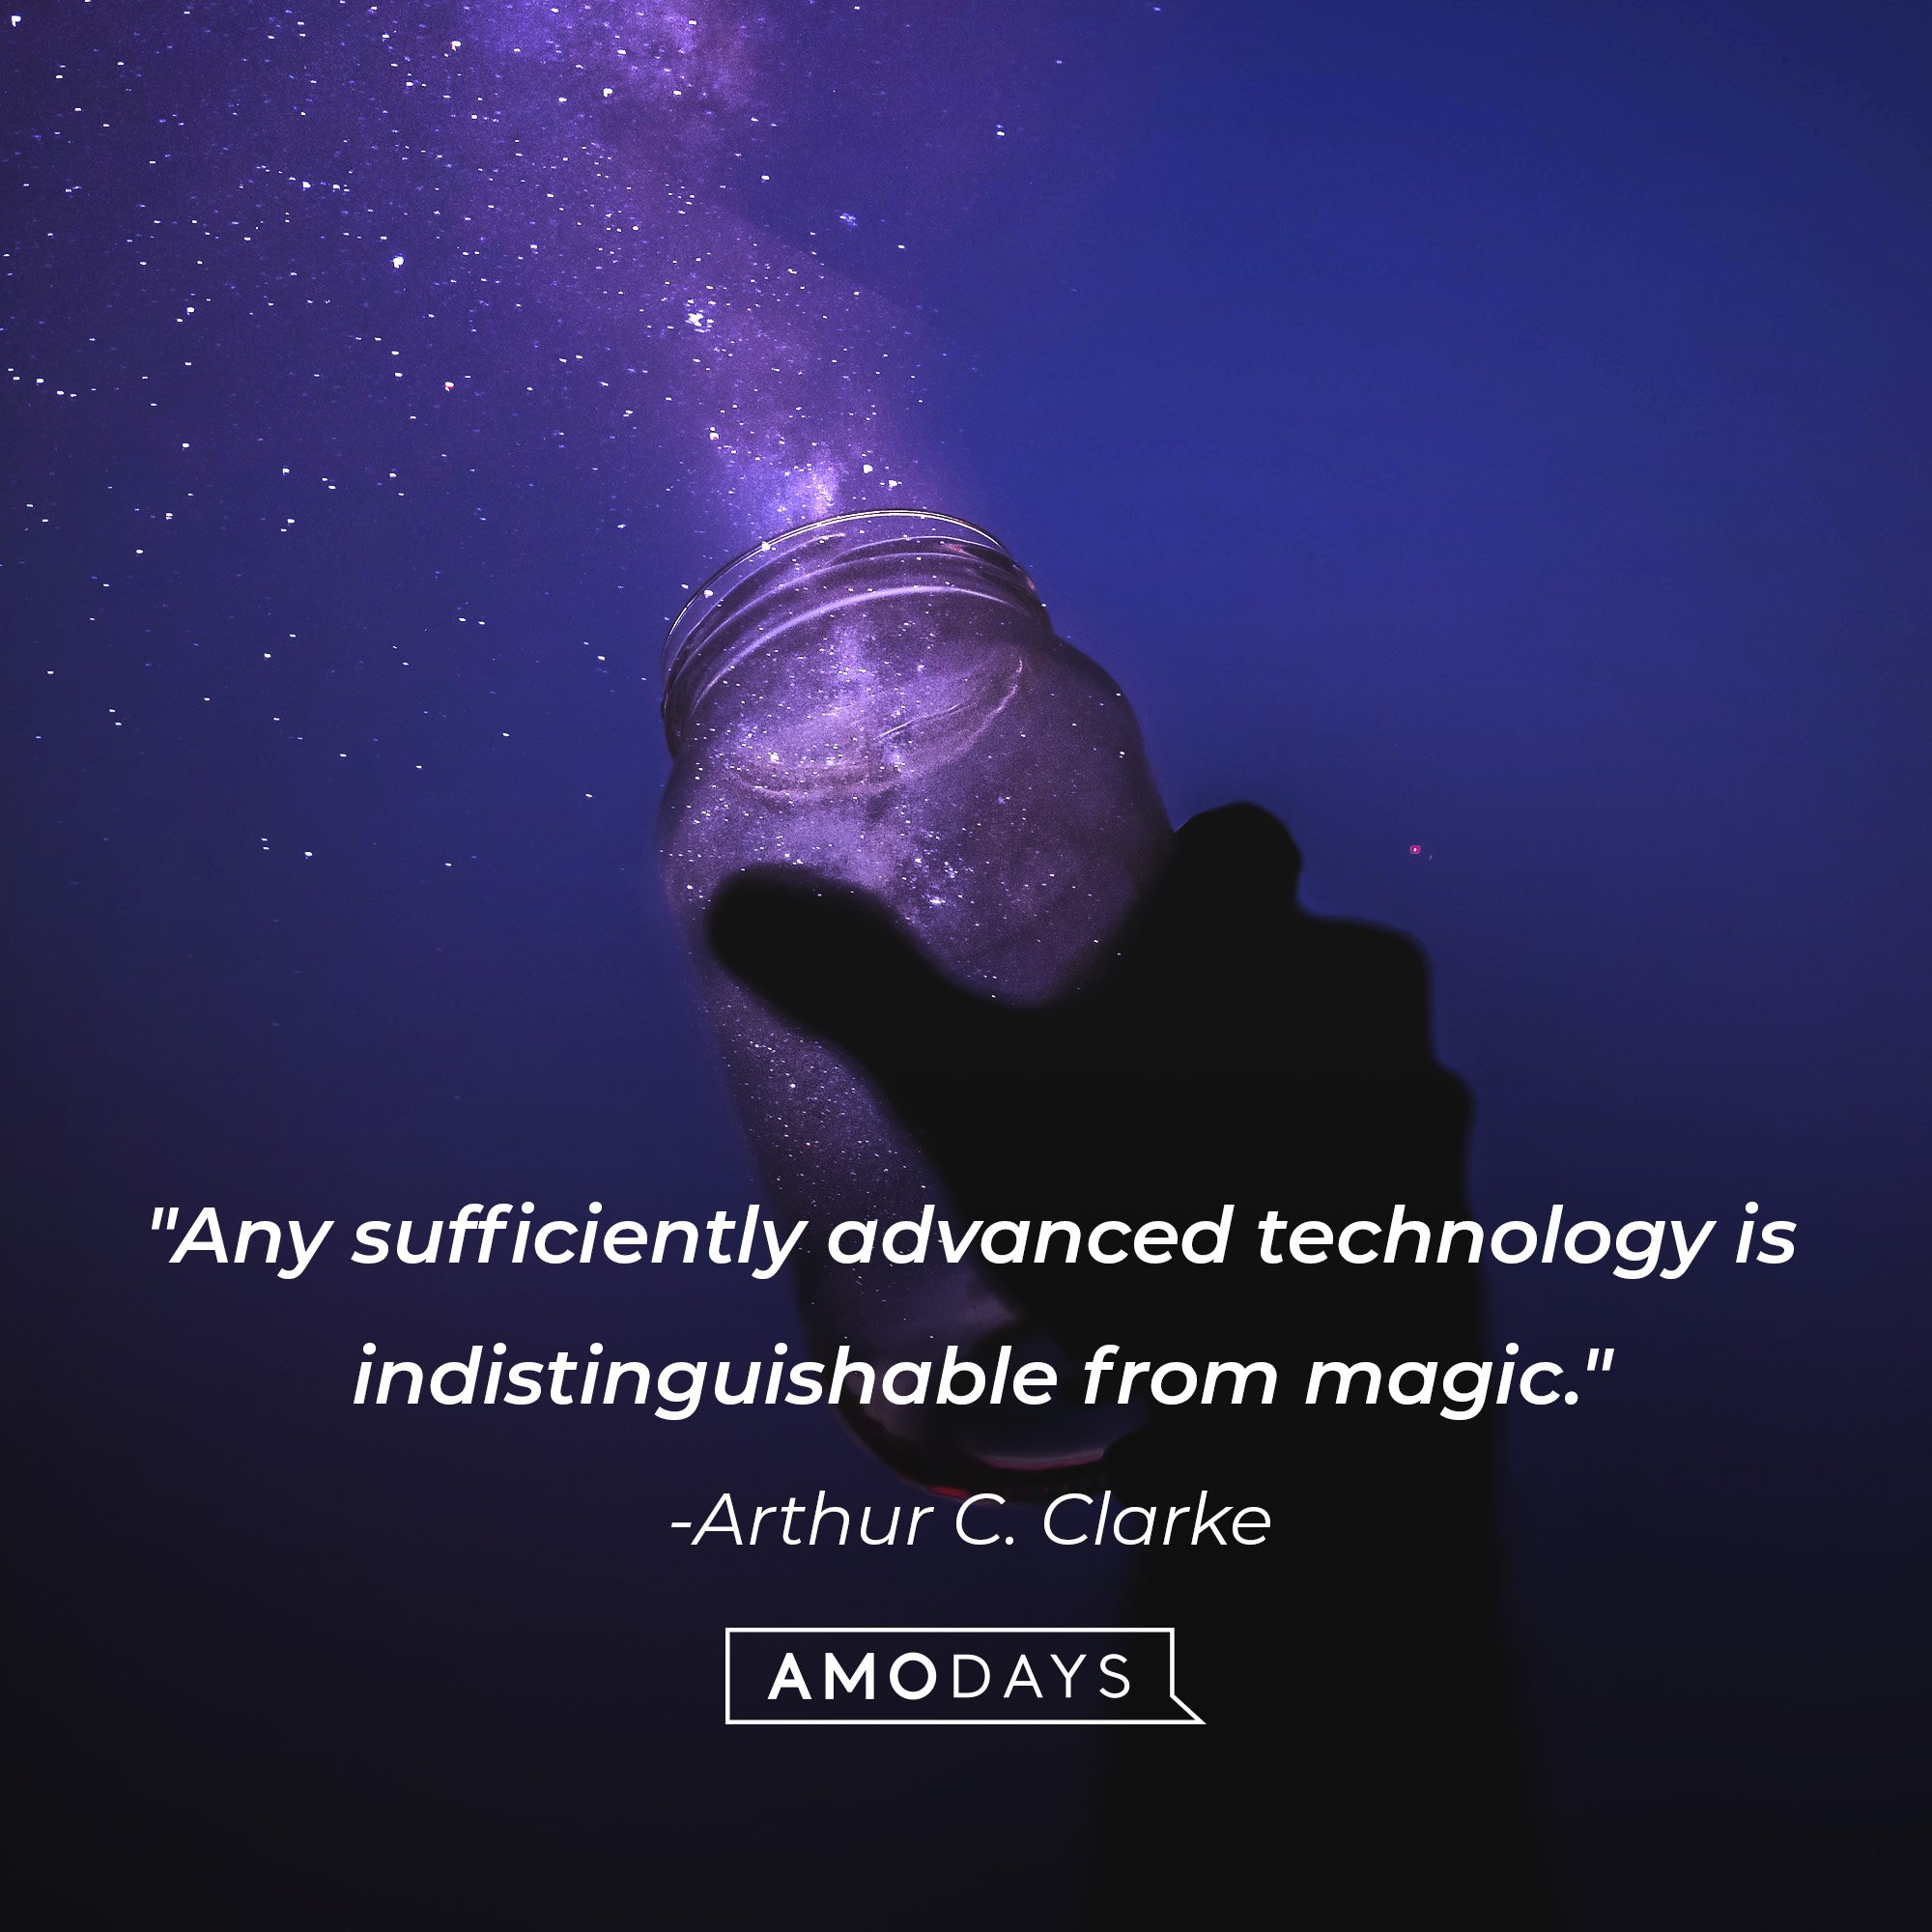 Arthur C. Clarke’s quote: "Any sufficiently advanced technology is indistinguishable from magic." | Image: AmoDays